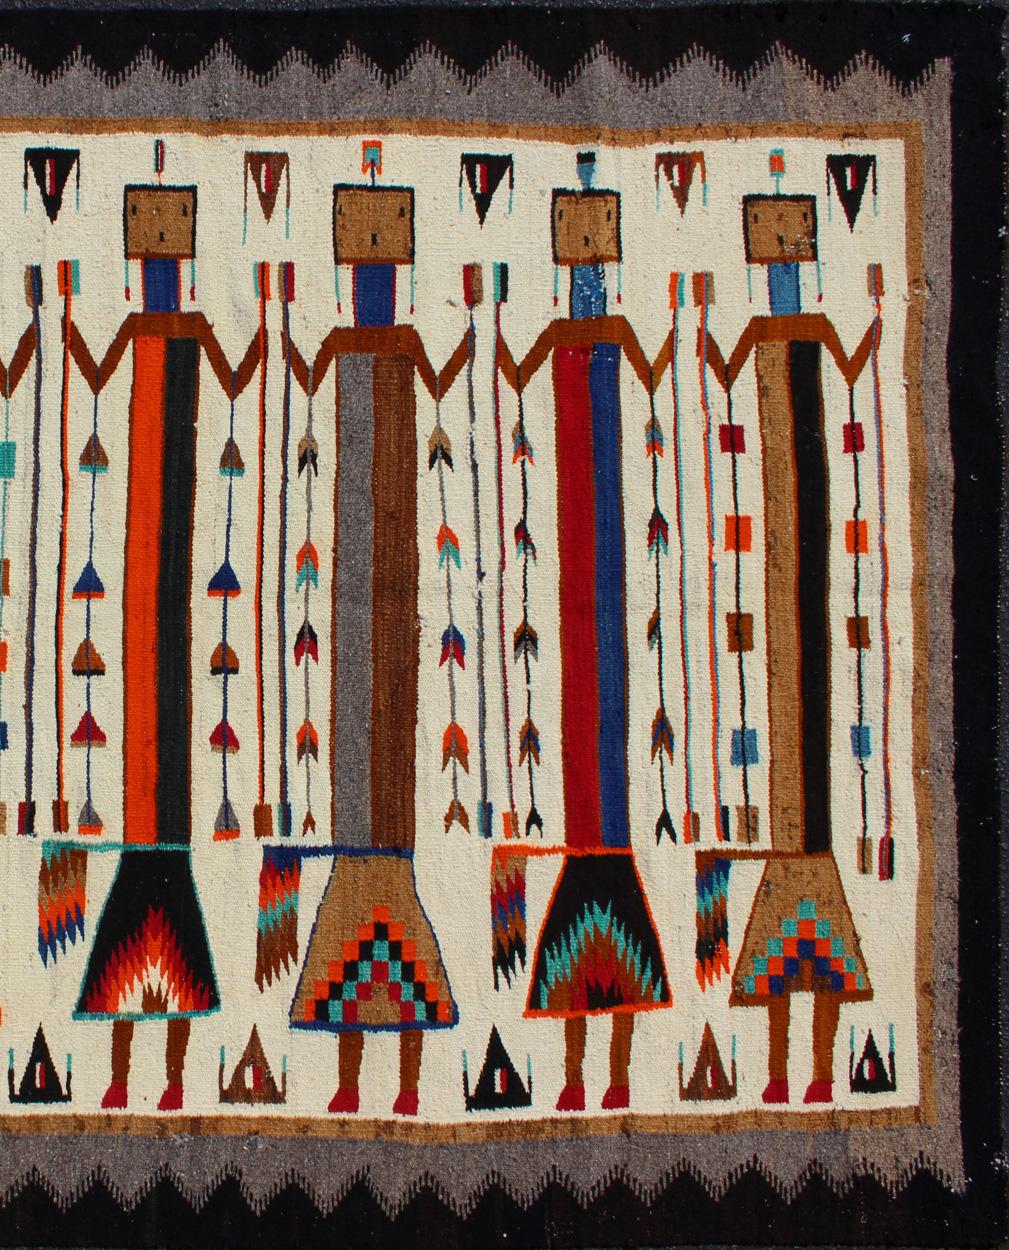 American Navajo Kilim with Tribal and geometric design in ivory field and black border with Red, black, orange, grey and multi colors kilim 1912-1512, country of origin / type: America / Navajo, circa 1950

This intriguing large vintage Navajo